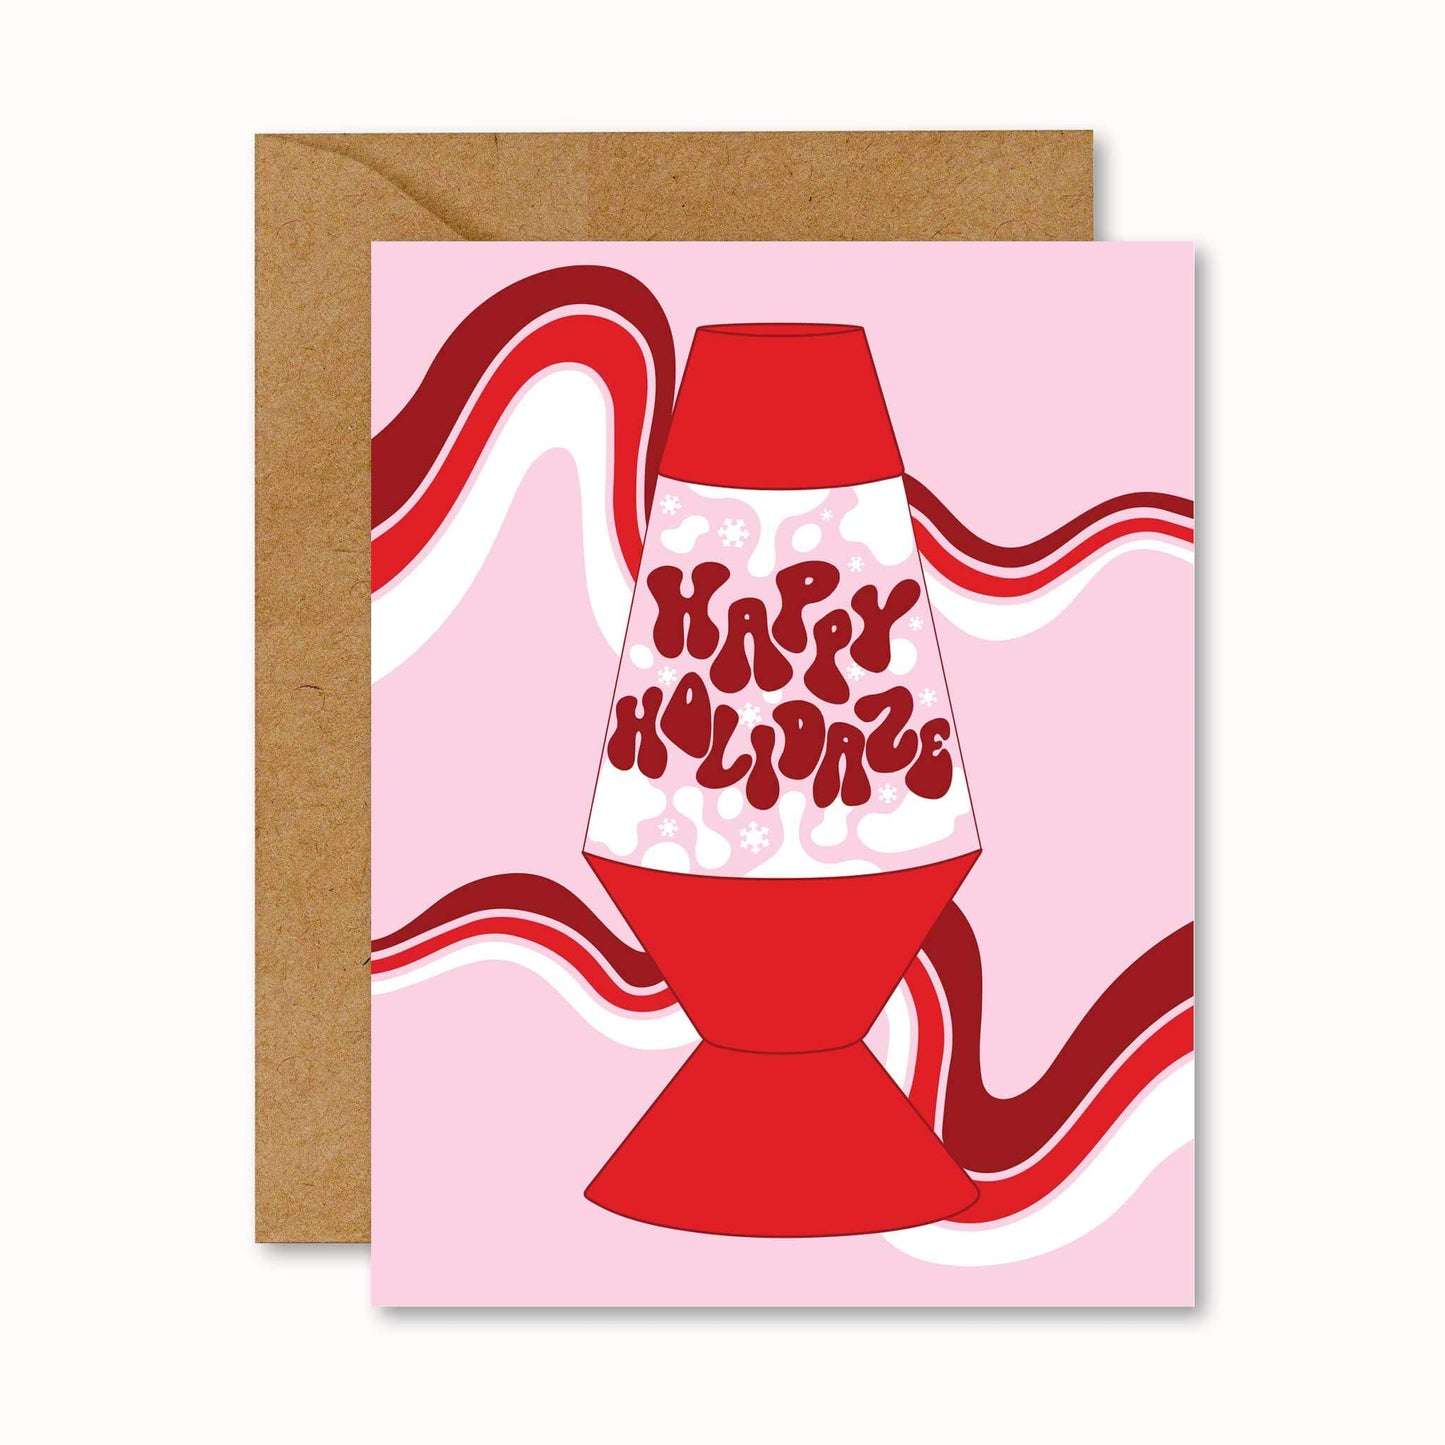 christmas greeting card with a retro lava lamp graphic with text that reads "happy holidaze"